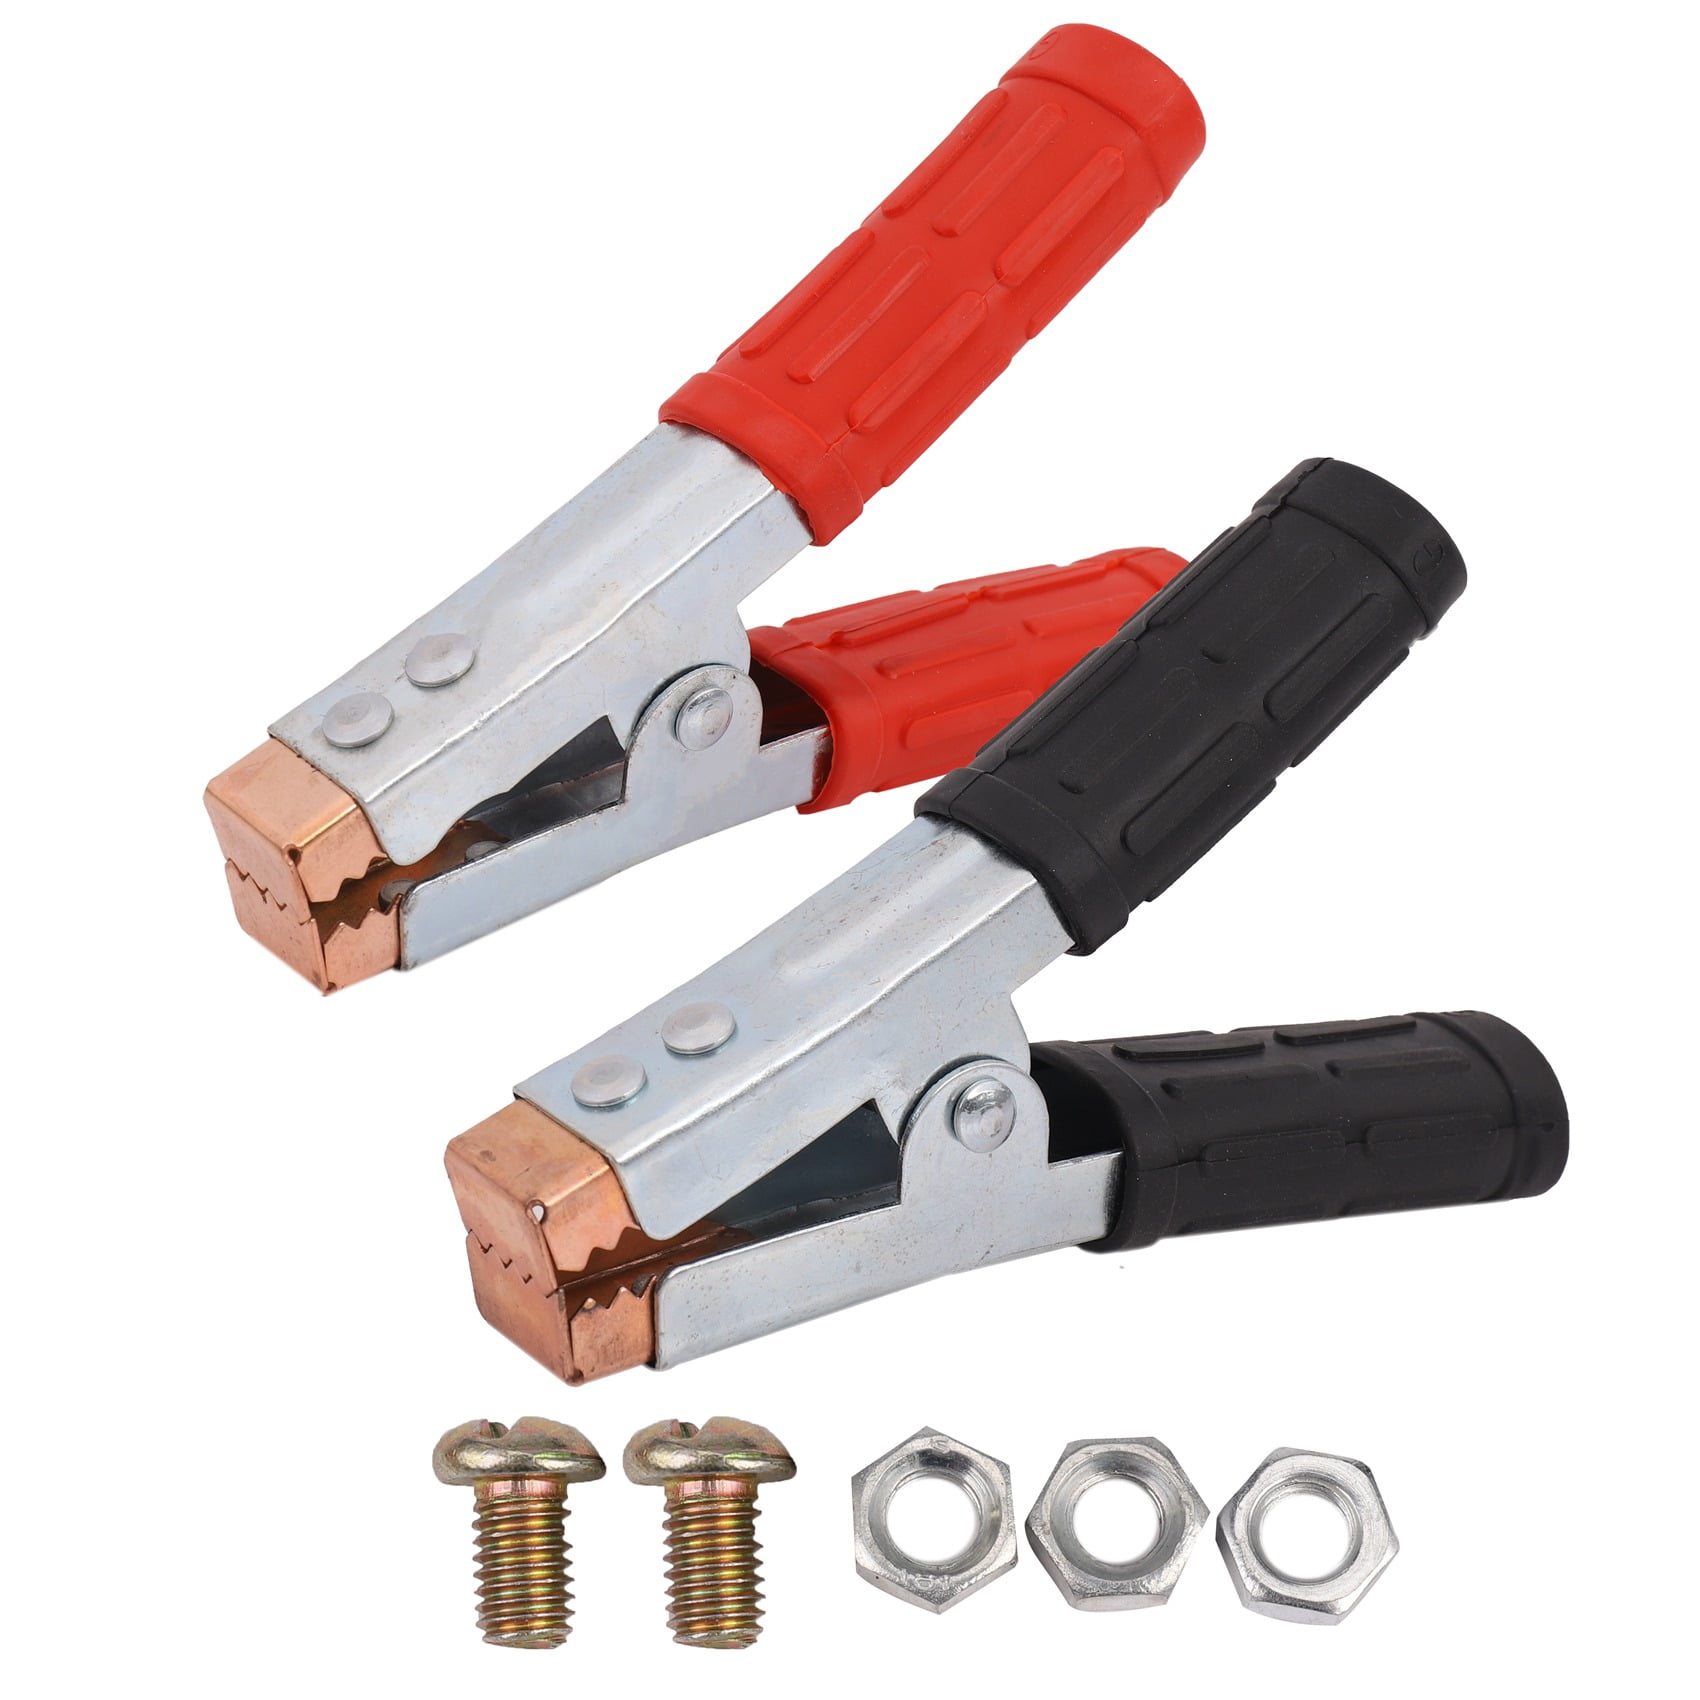 4x Usrful Terminal Crocodile Clamps Alligator Clip Red Black for Cable Batteries 